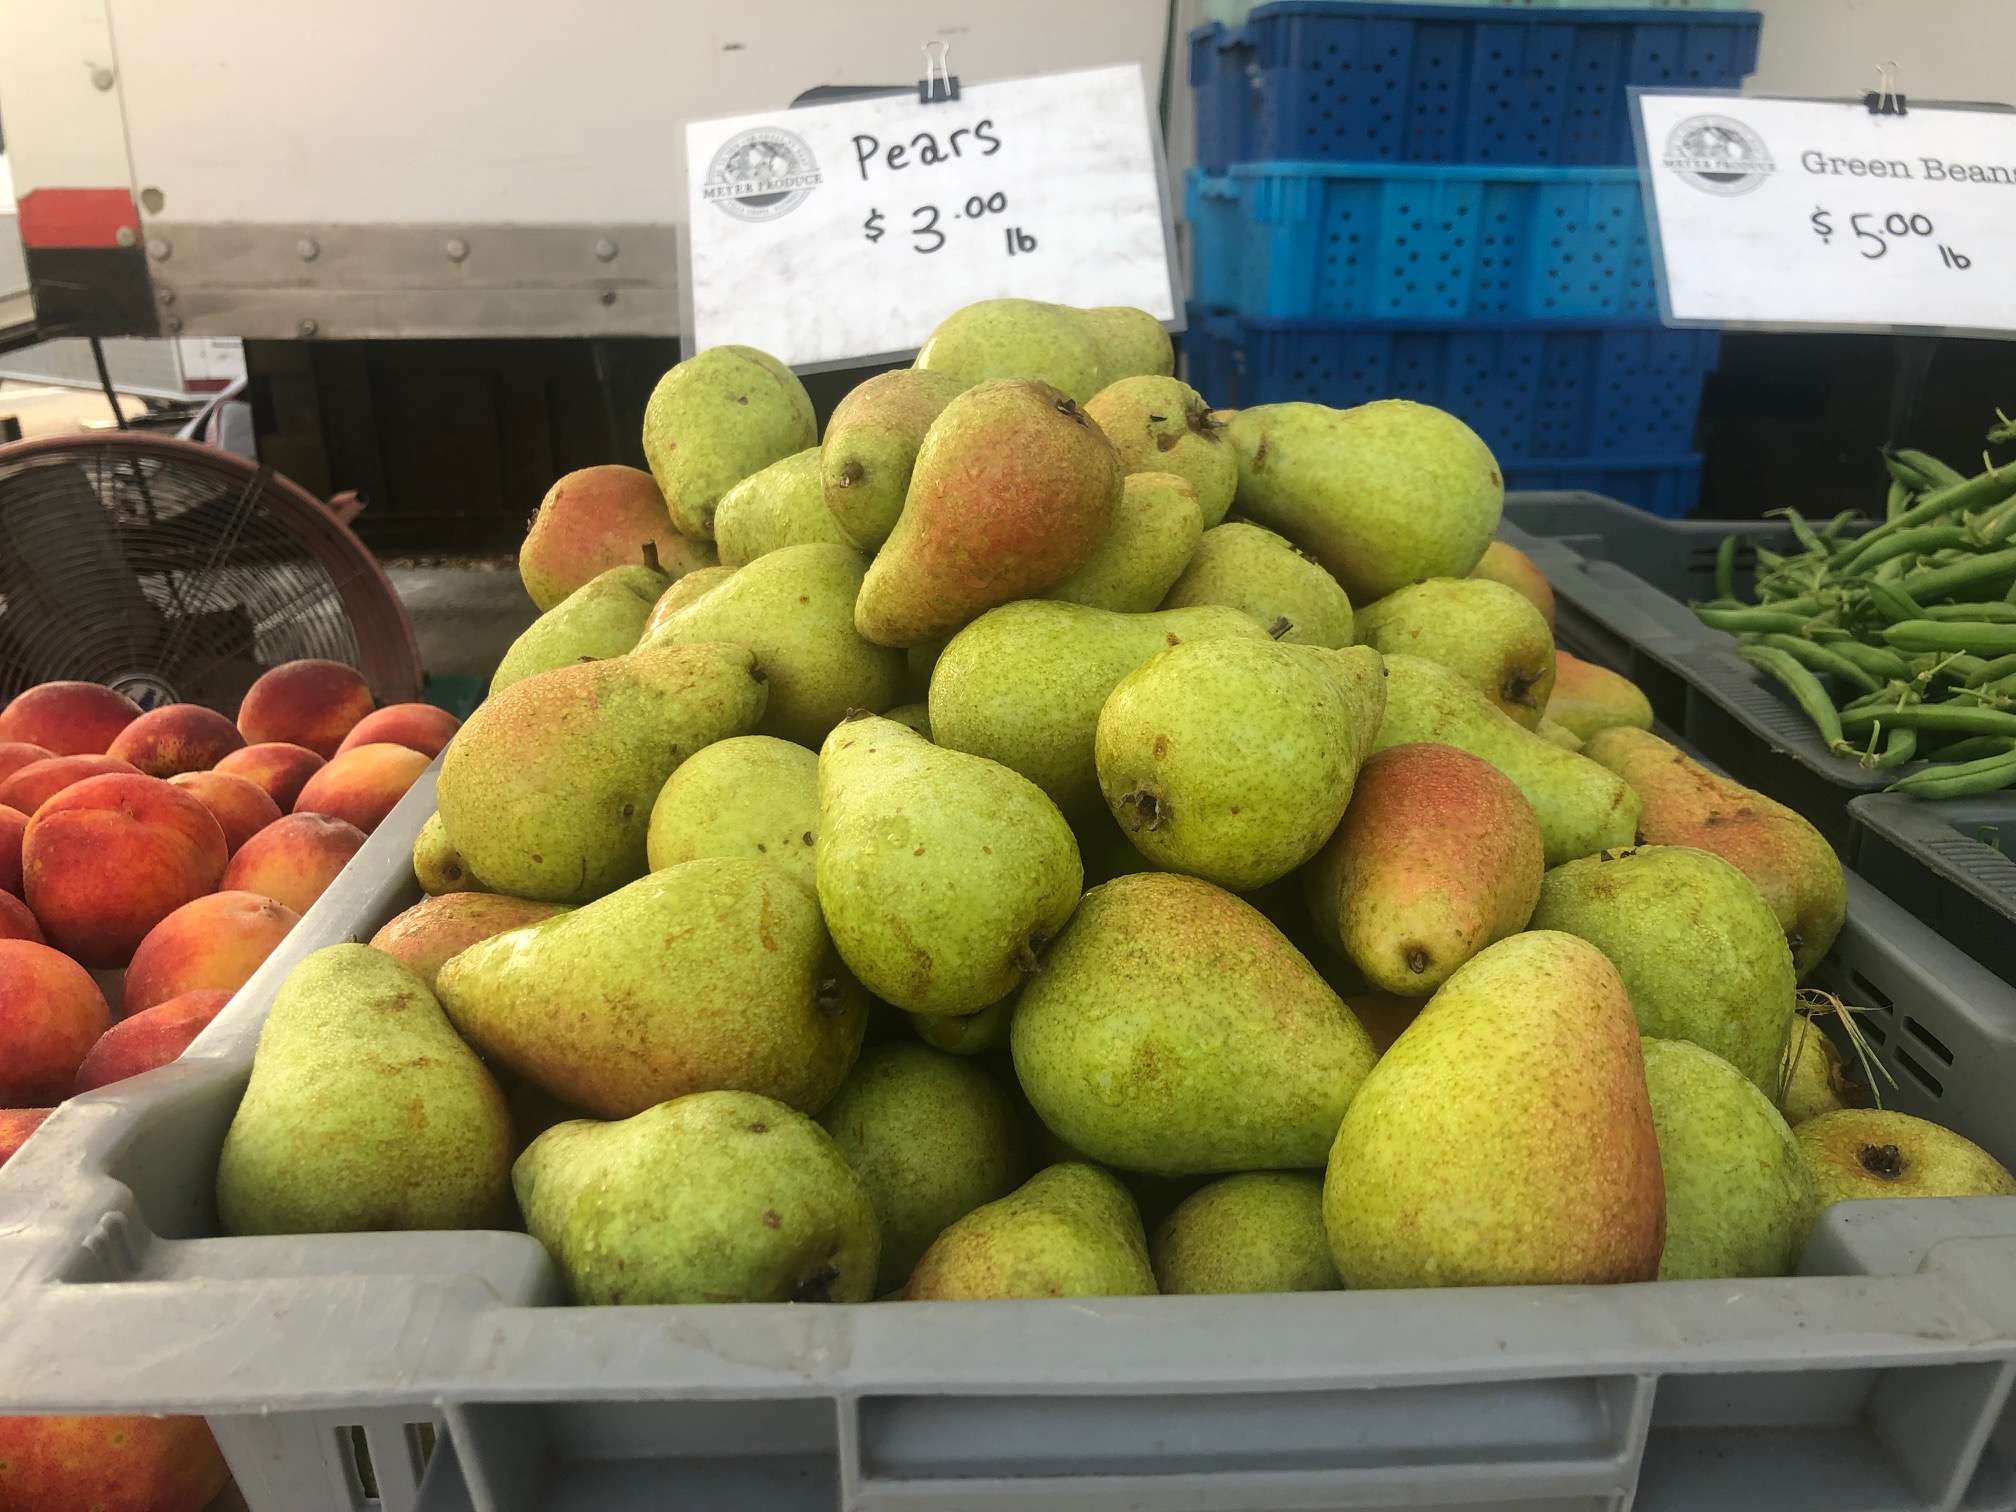 In a gray container, there are several pears stacked on top of each other waiting to be sold at the farmers' market. Photo by Alyssa Buckley.